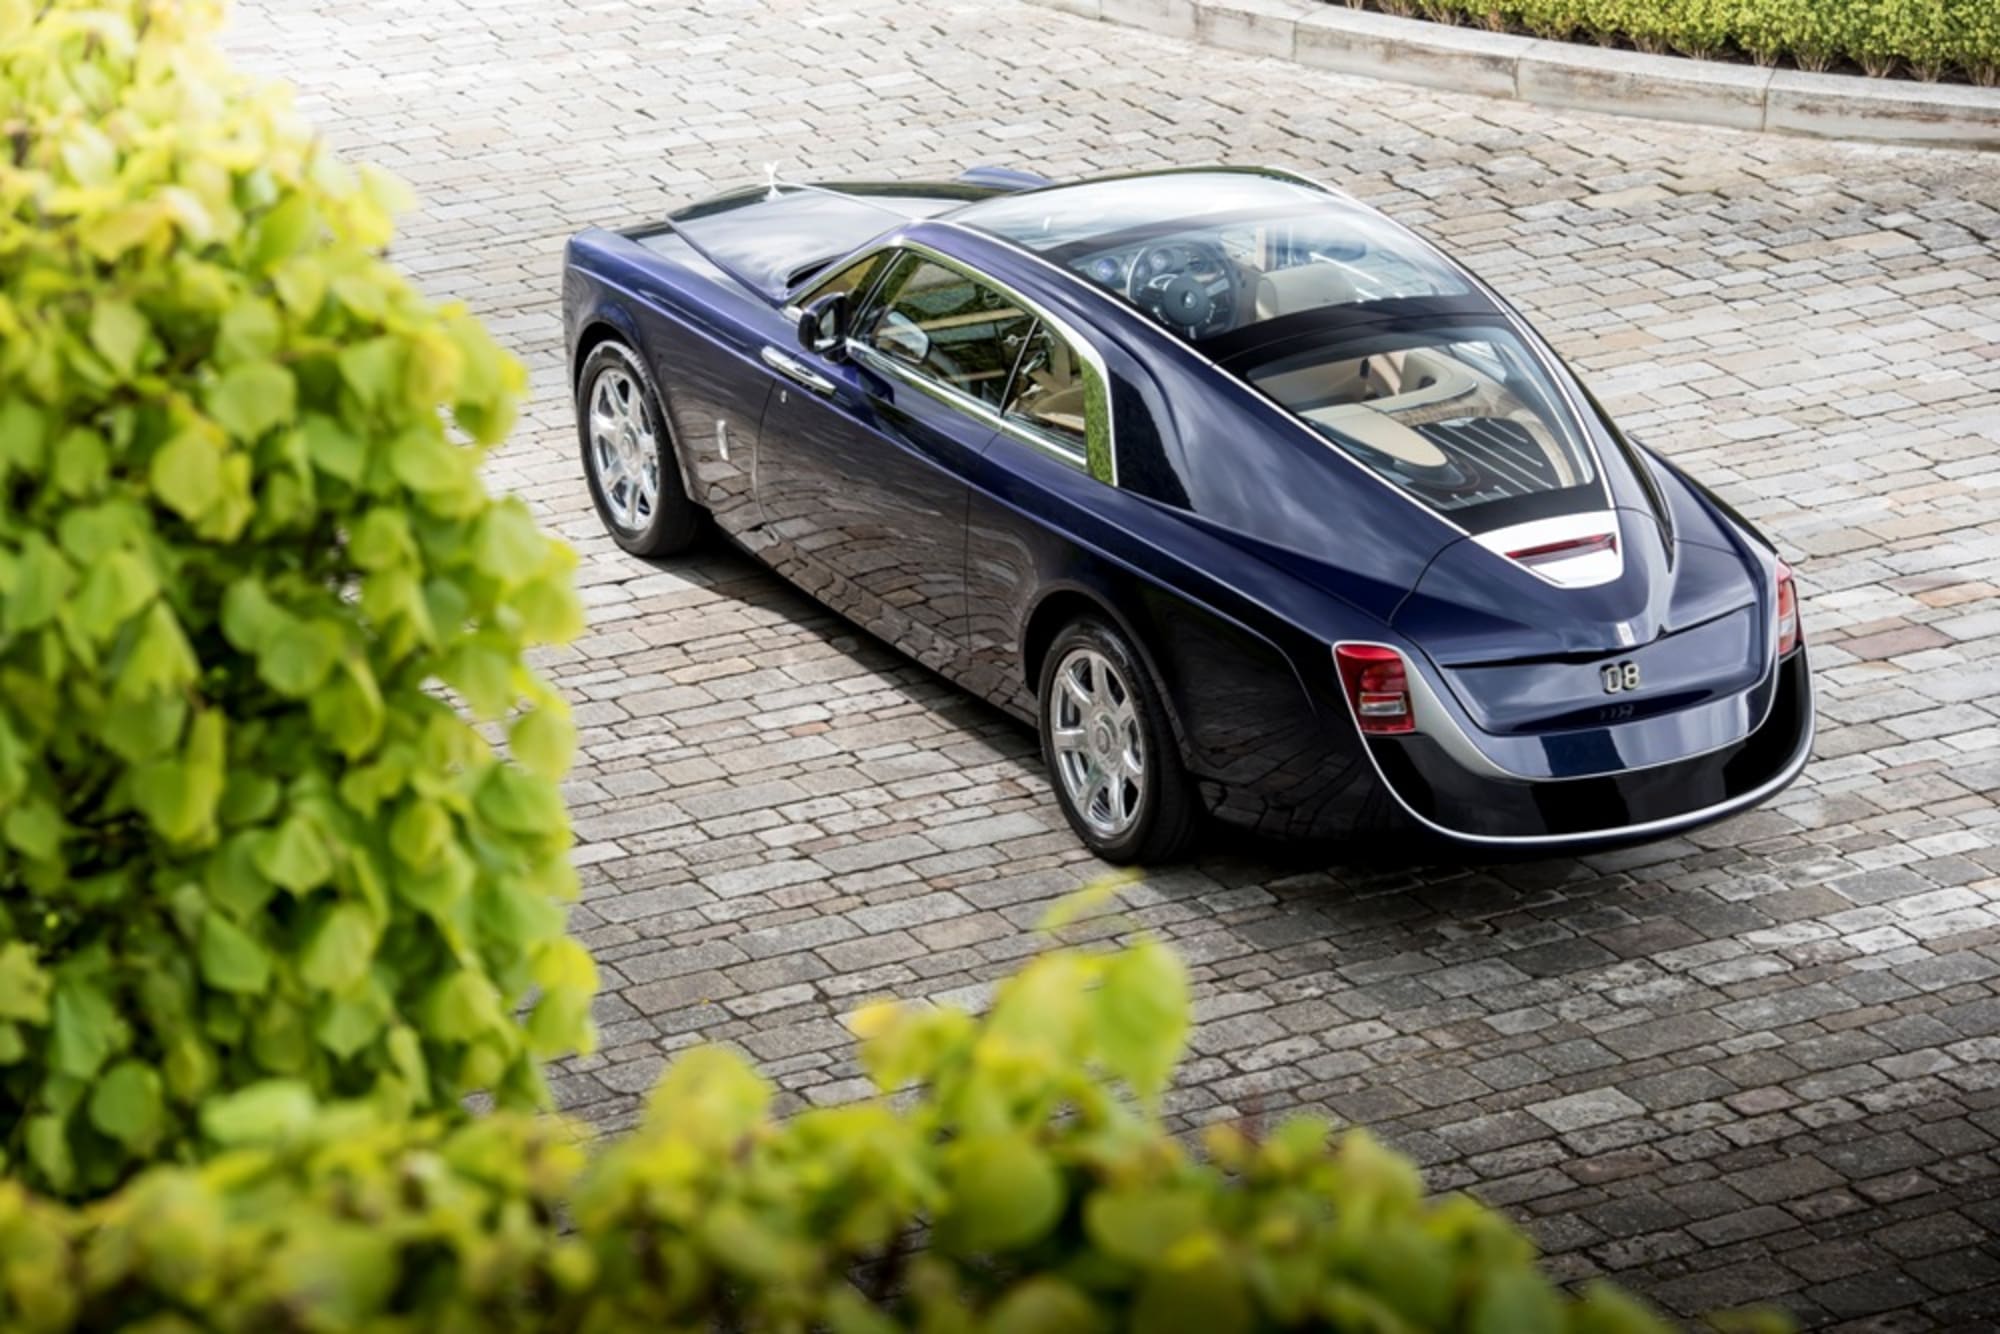 Rolls Royce Sweptail: The $12.8 Million, World's Most Expensive New Car